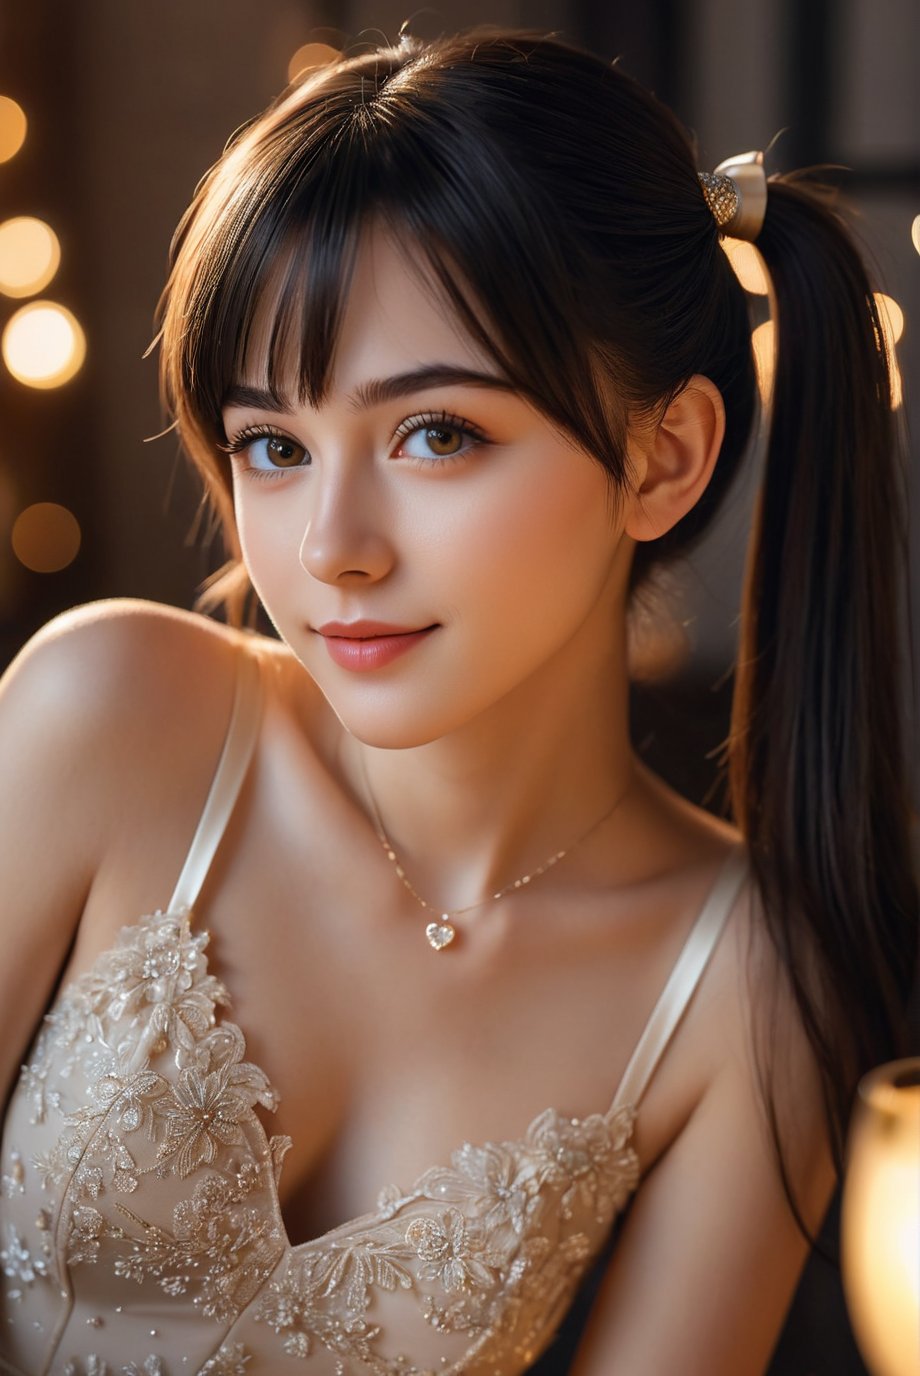 Here's the SD prompt:

A tender kiss on the cheek for me as you whisper 'I love you' in Hungarian. Photorealistic 8K portrait of a stunning 16-year-old girl with cute face, beautiful eyes, and delicate features. She wears a champagne-colored turtleneck wedding dress on a tabletop setup under soft light, city lights at night casting a warm glow. Her slender body and perfect anatomy are highlighted by cinematic lighting. She looks directly at the camera with a subtle grin (0.7) as her black hair styled in twin tails frames her beautiful face with intricate details.